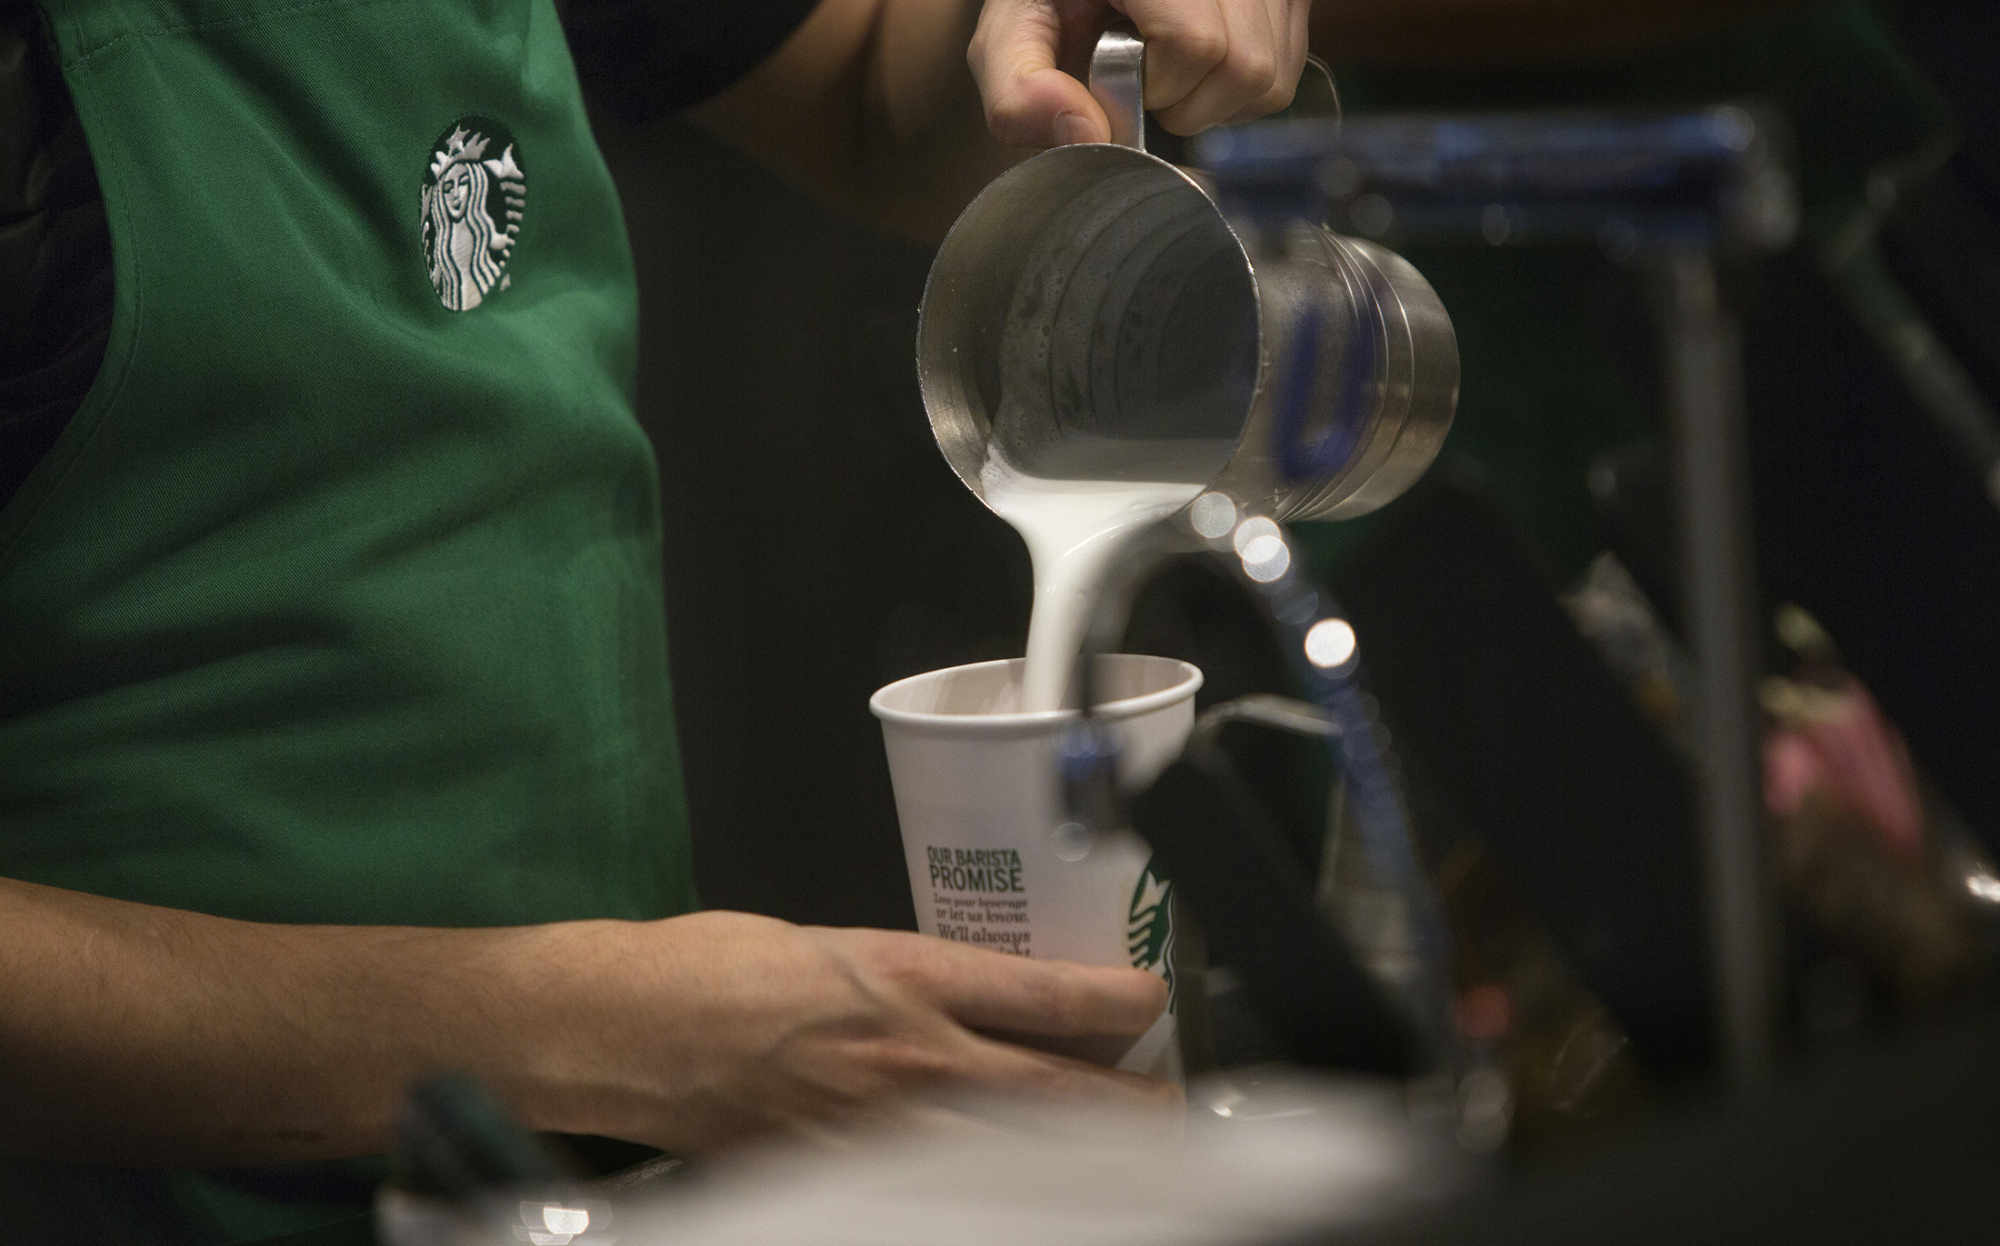 A barista pours frothed milk into a drink inside a Starbucks Corp. coffee shop in New York on Jan. 19, 2016.
